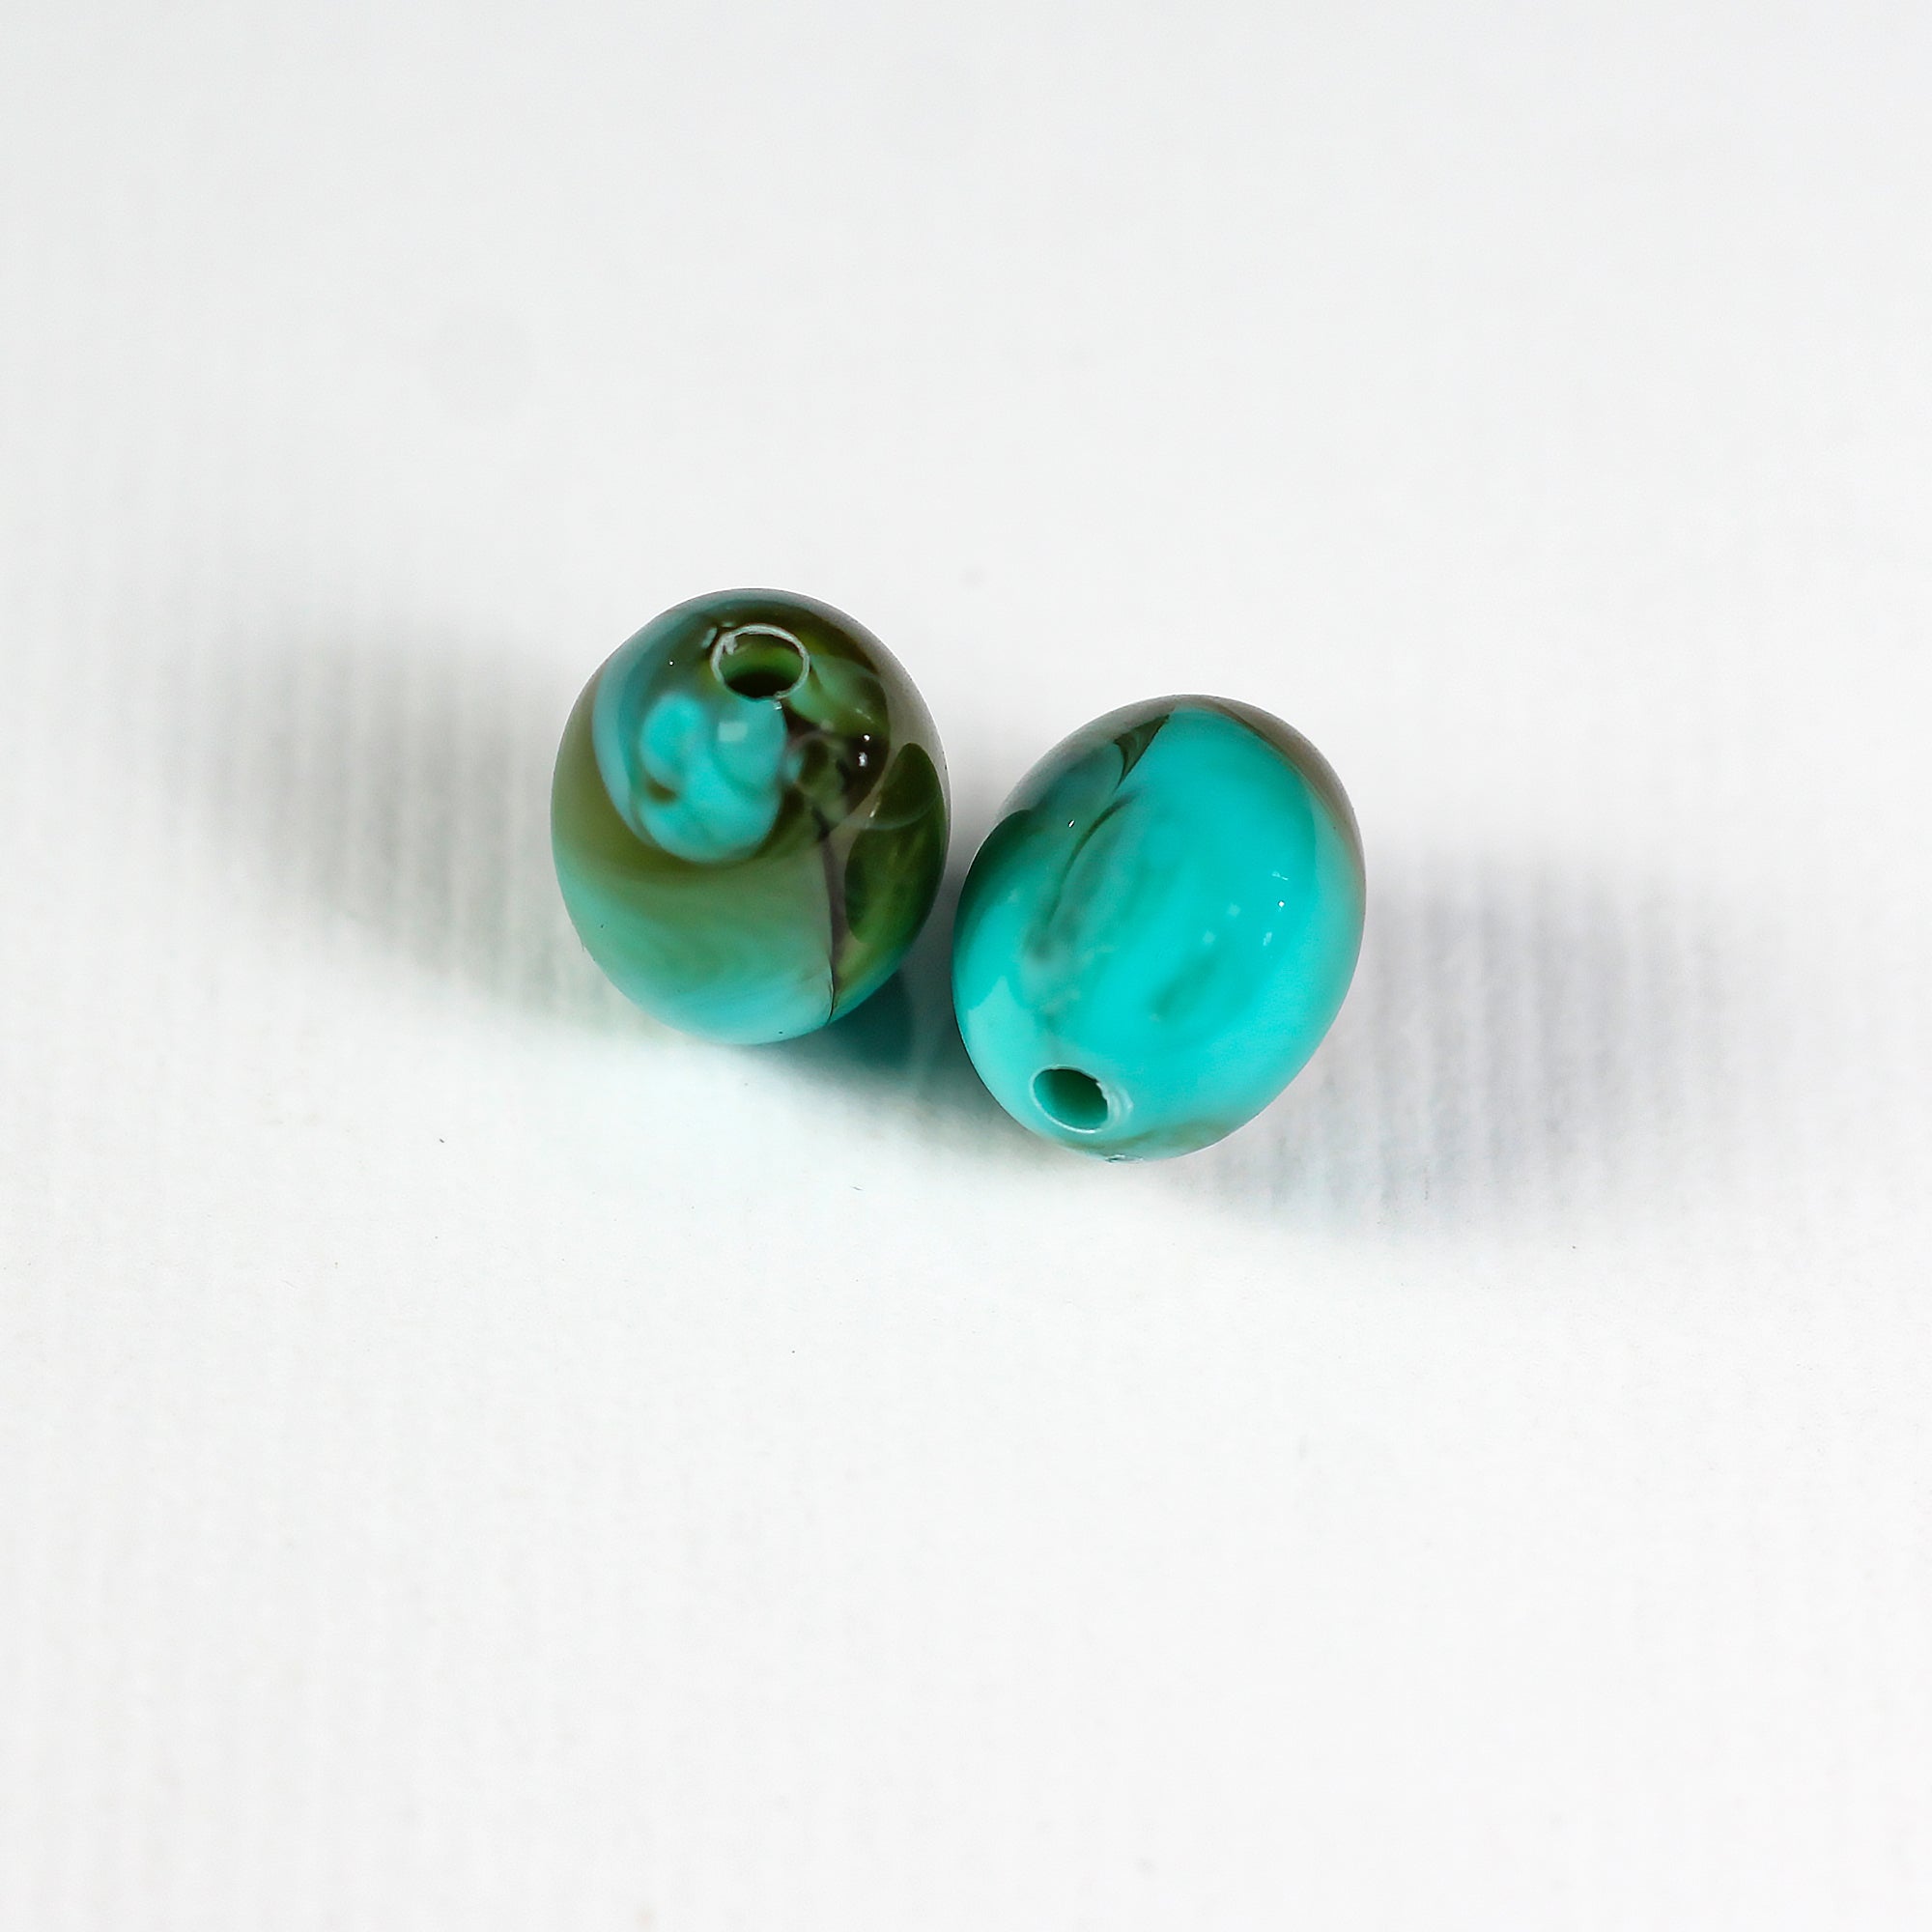 Beads Turquoise Marbled Oval Stone 13Mm X 10Mm 30G Pb Ib